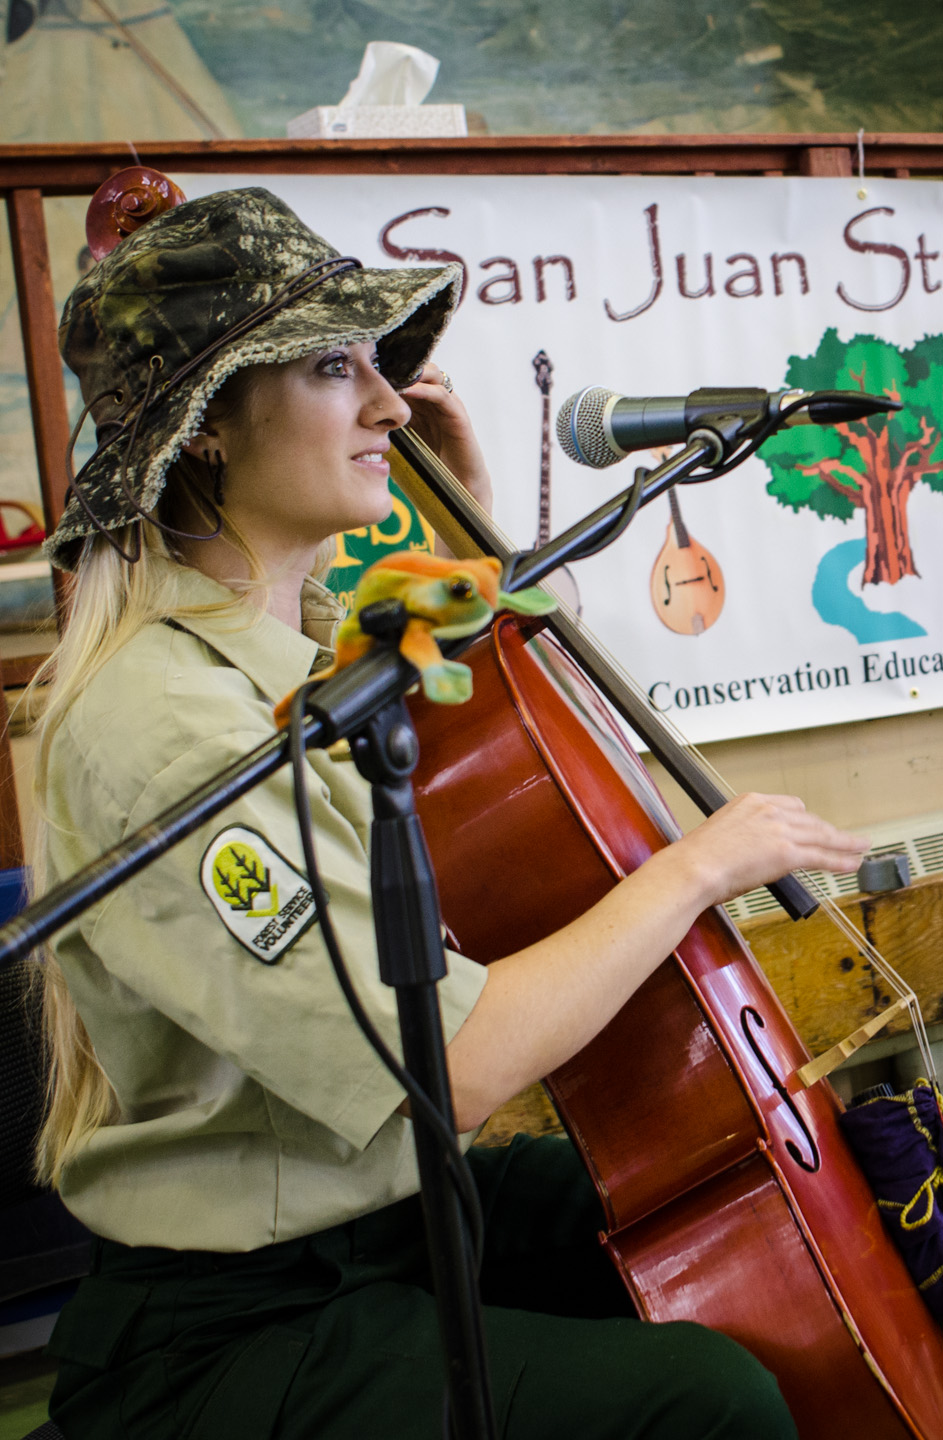 San Juan String Band members donned their U.S. Forest Service uniforms during the bluegrass presentation